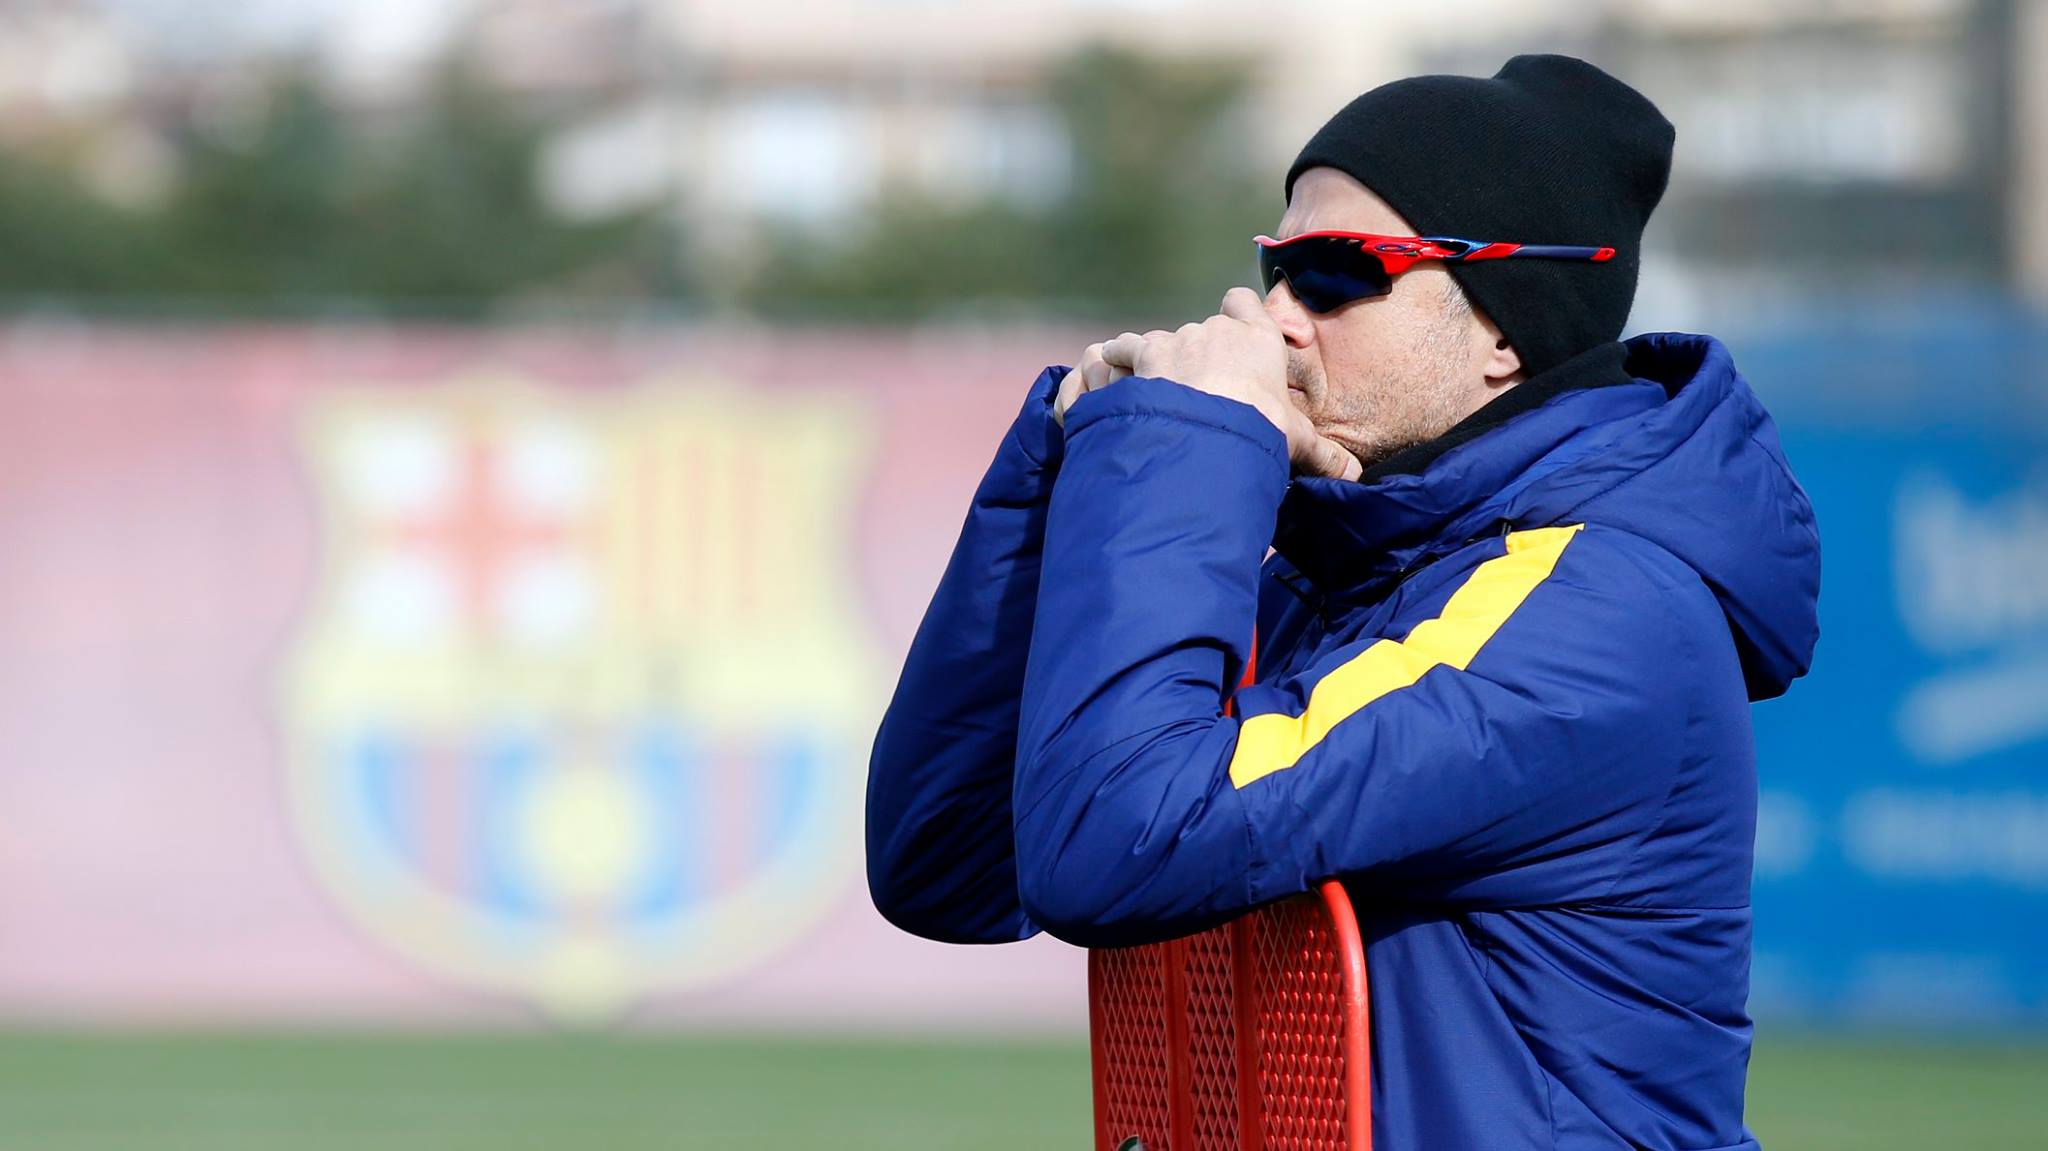 Will Luis Enrique be able to avenge last time's heavy defeat?